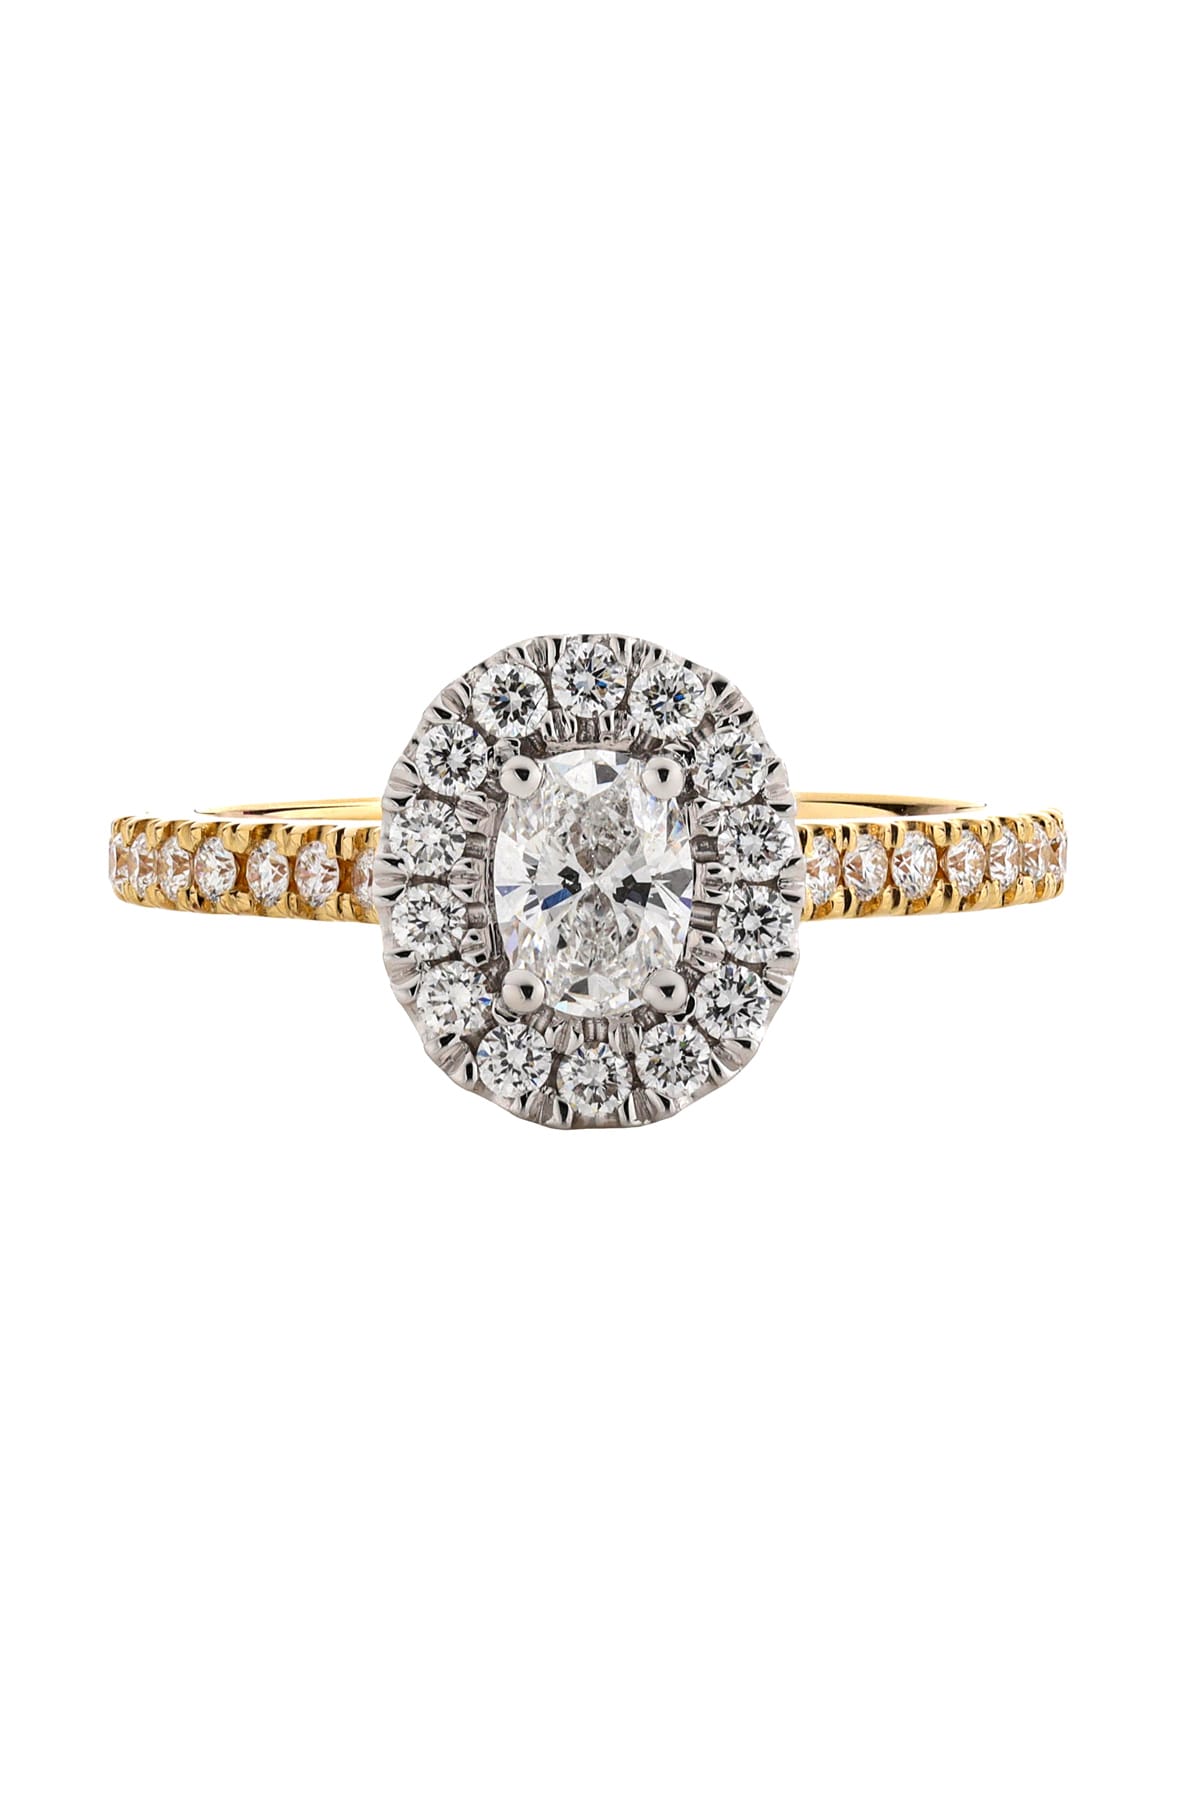 18 Carat Gold With 0.50 Carat Oval Diamond Halo Engagement Ring available at LeGassick Diamonds and Jewellery Gold Coast, Australia.